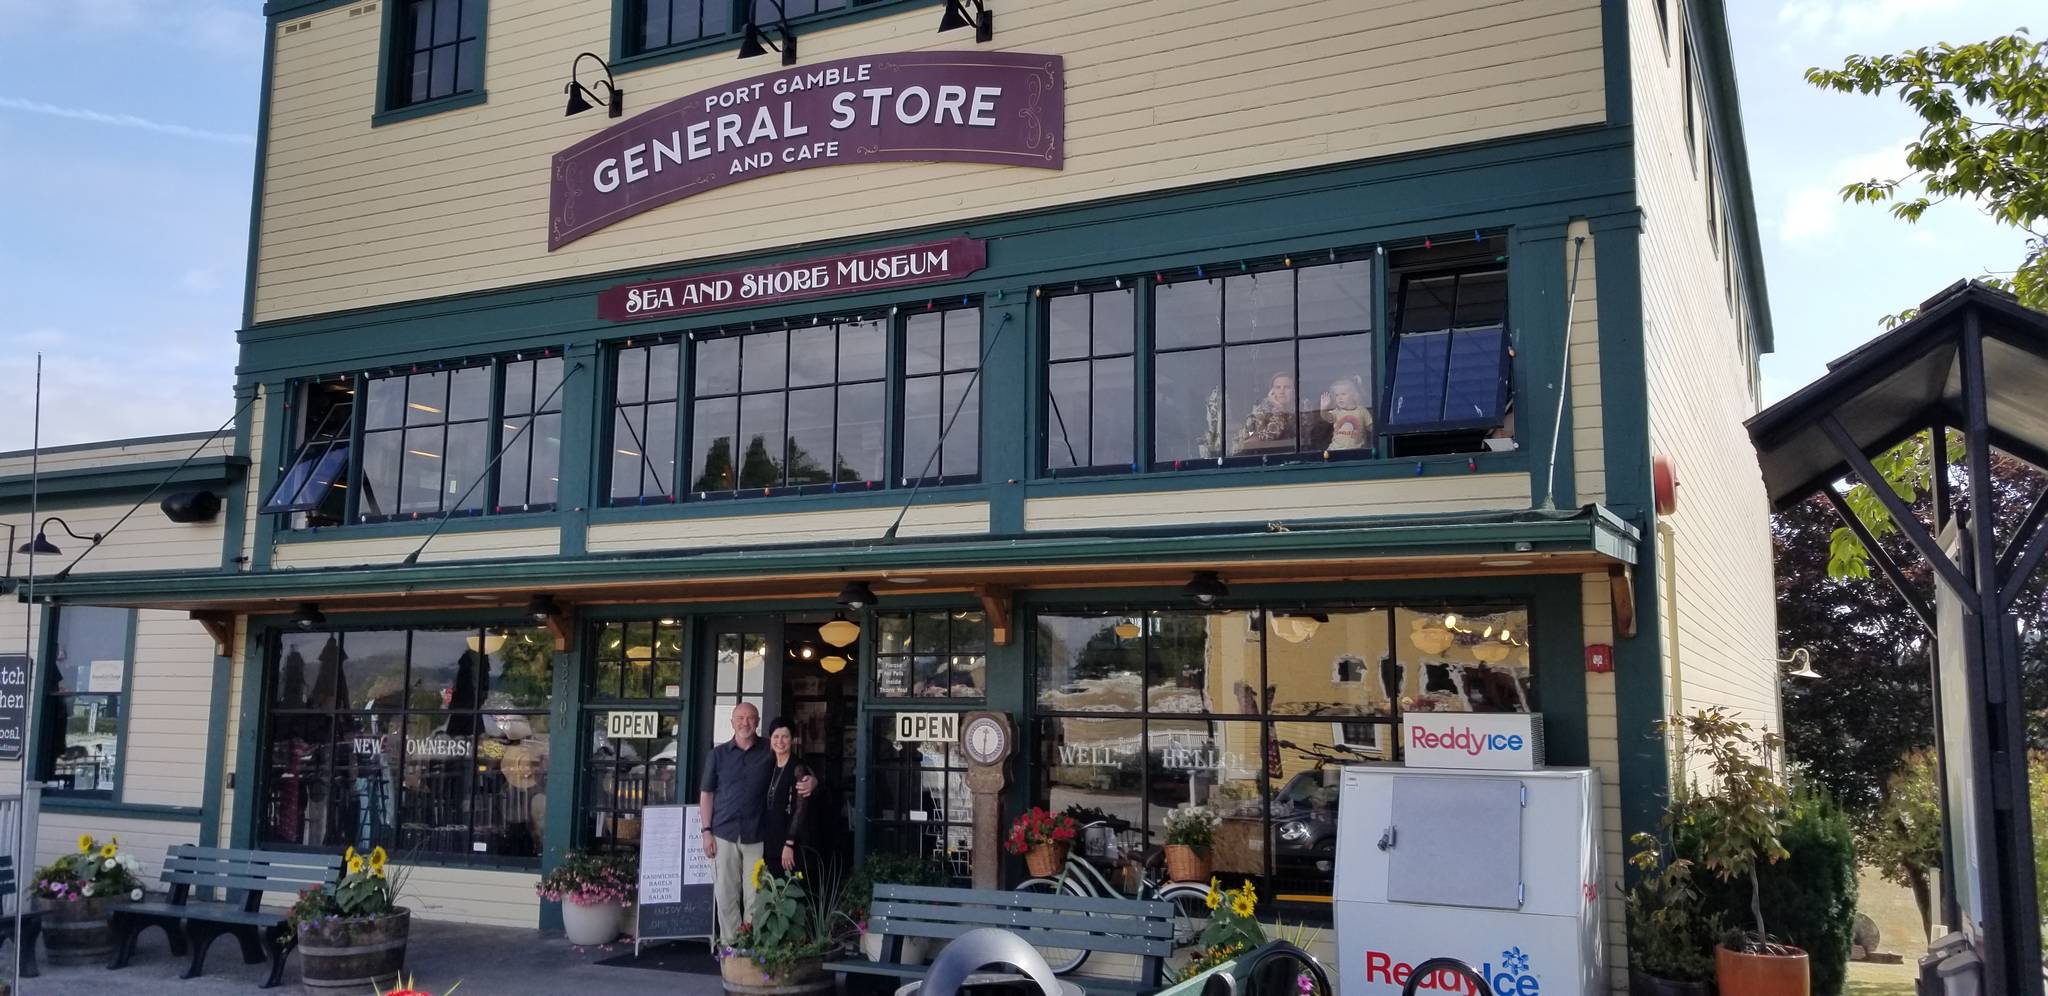 The Port Gamble General Store and Cafe has new owners.